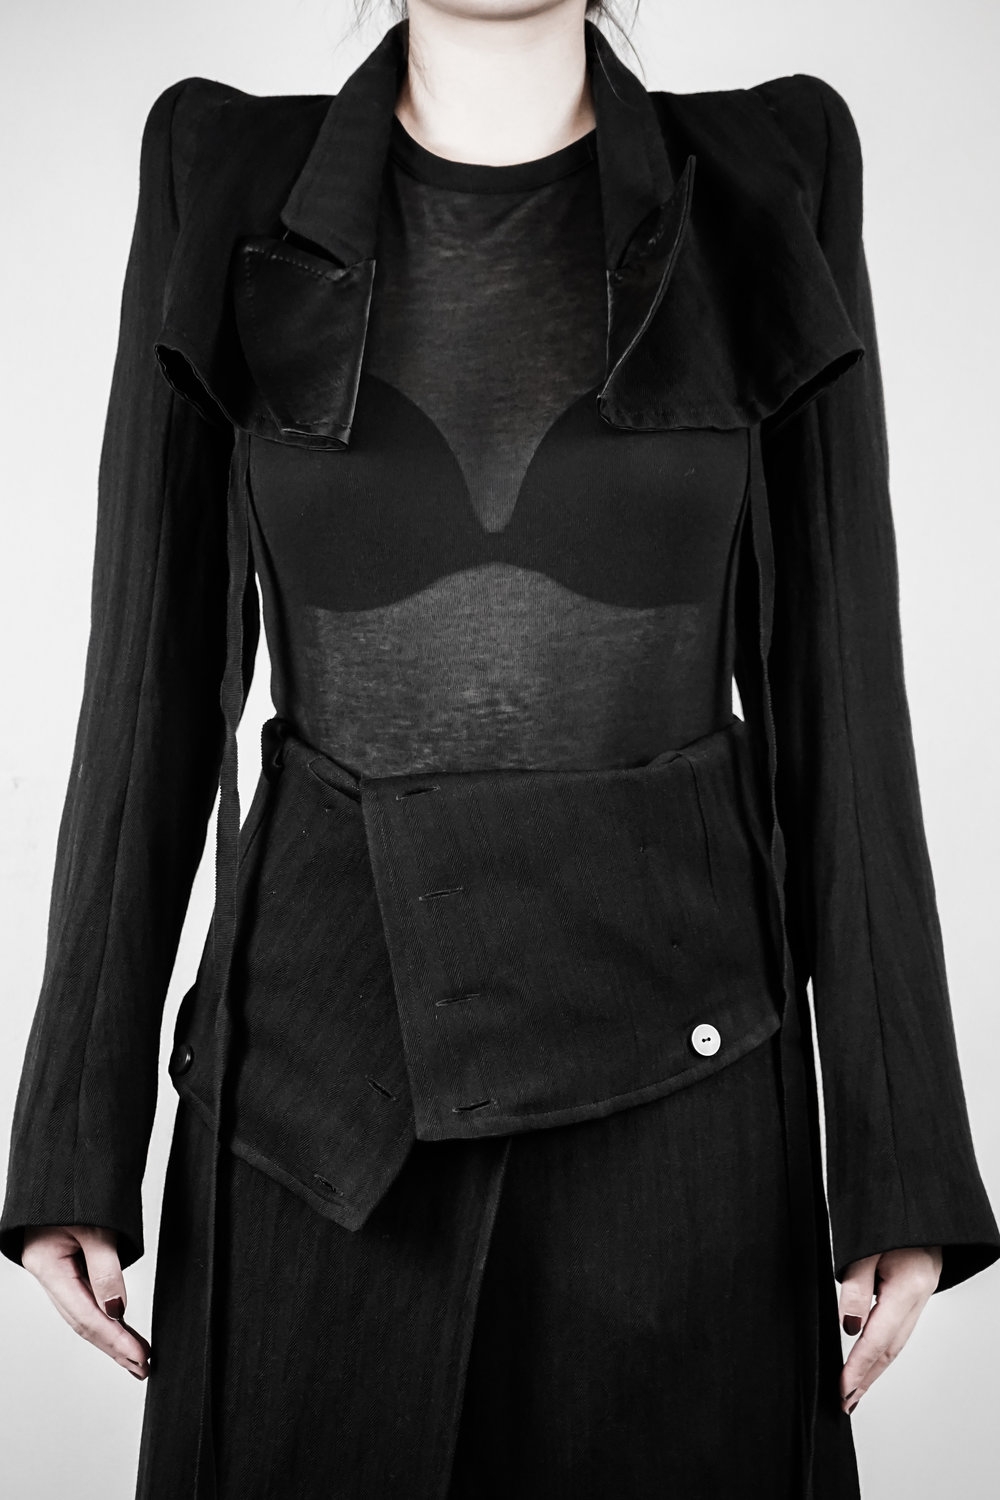 Ann Demeulemeester – Womens – Cropped Jacket – Striped – Black – Fleecewool / Acetate – Front Strap Closing – Silky Lapels